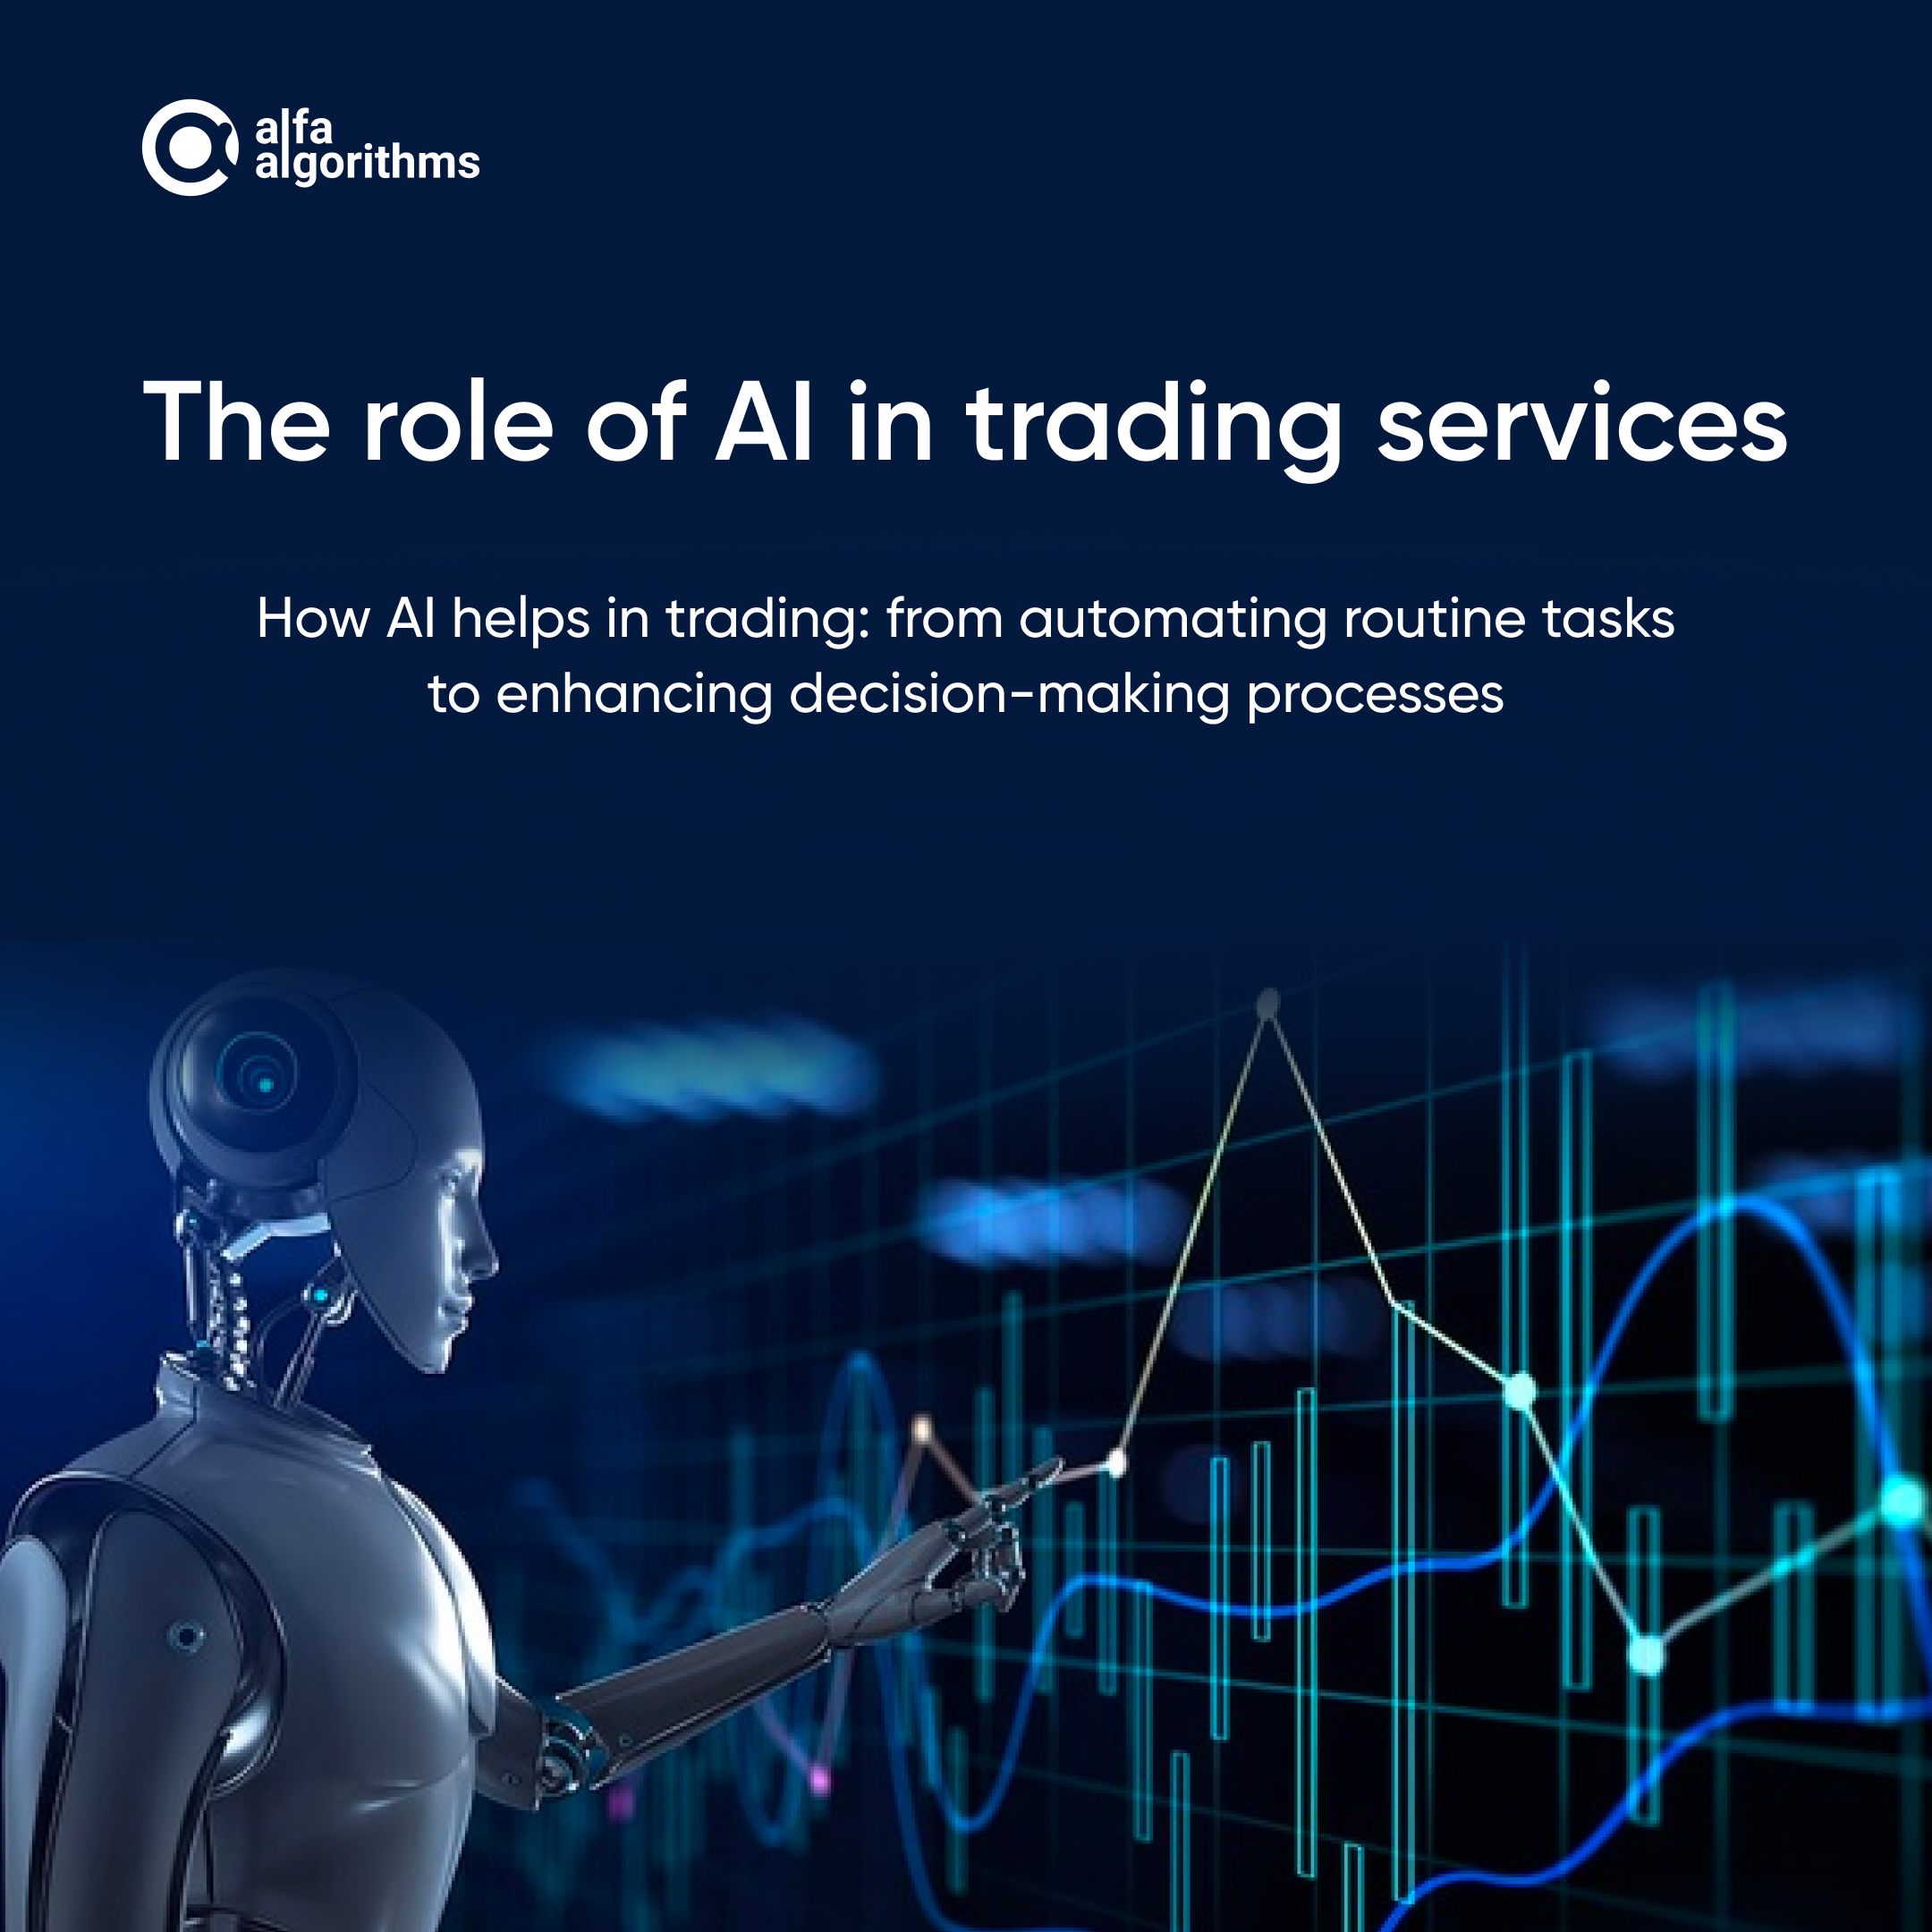 The role of AI in trading services